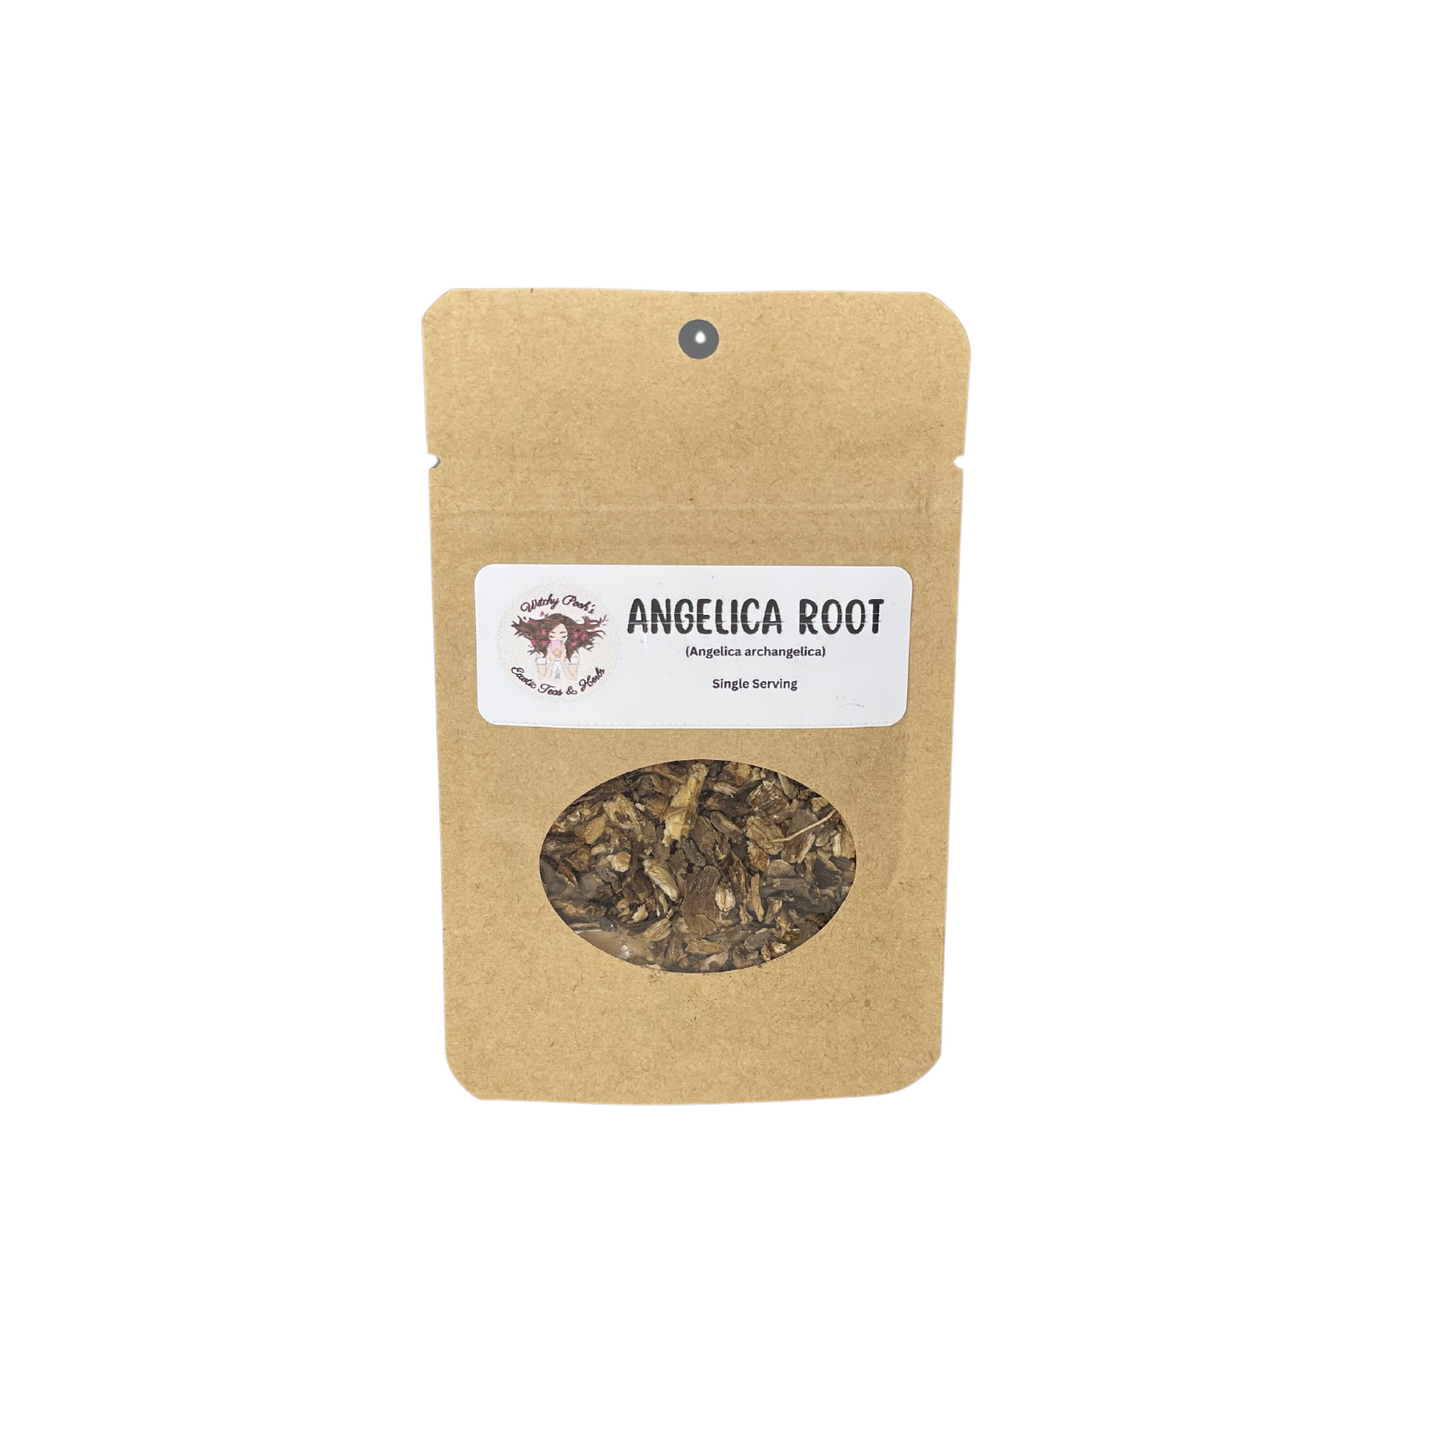 Witchy Pooh's Angelica Root to Invigorate Your Spirit and Shield Against Psychic Attacks